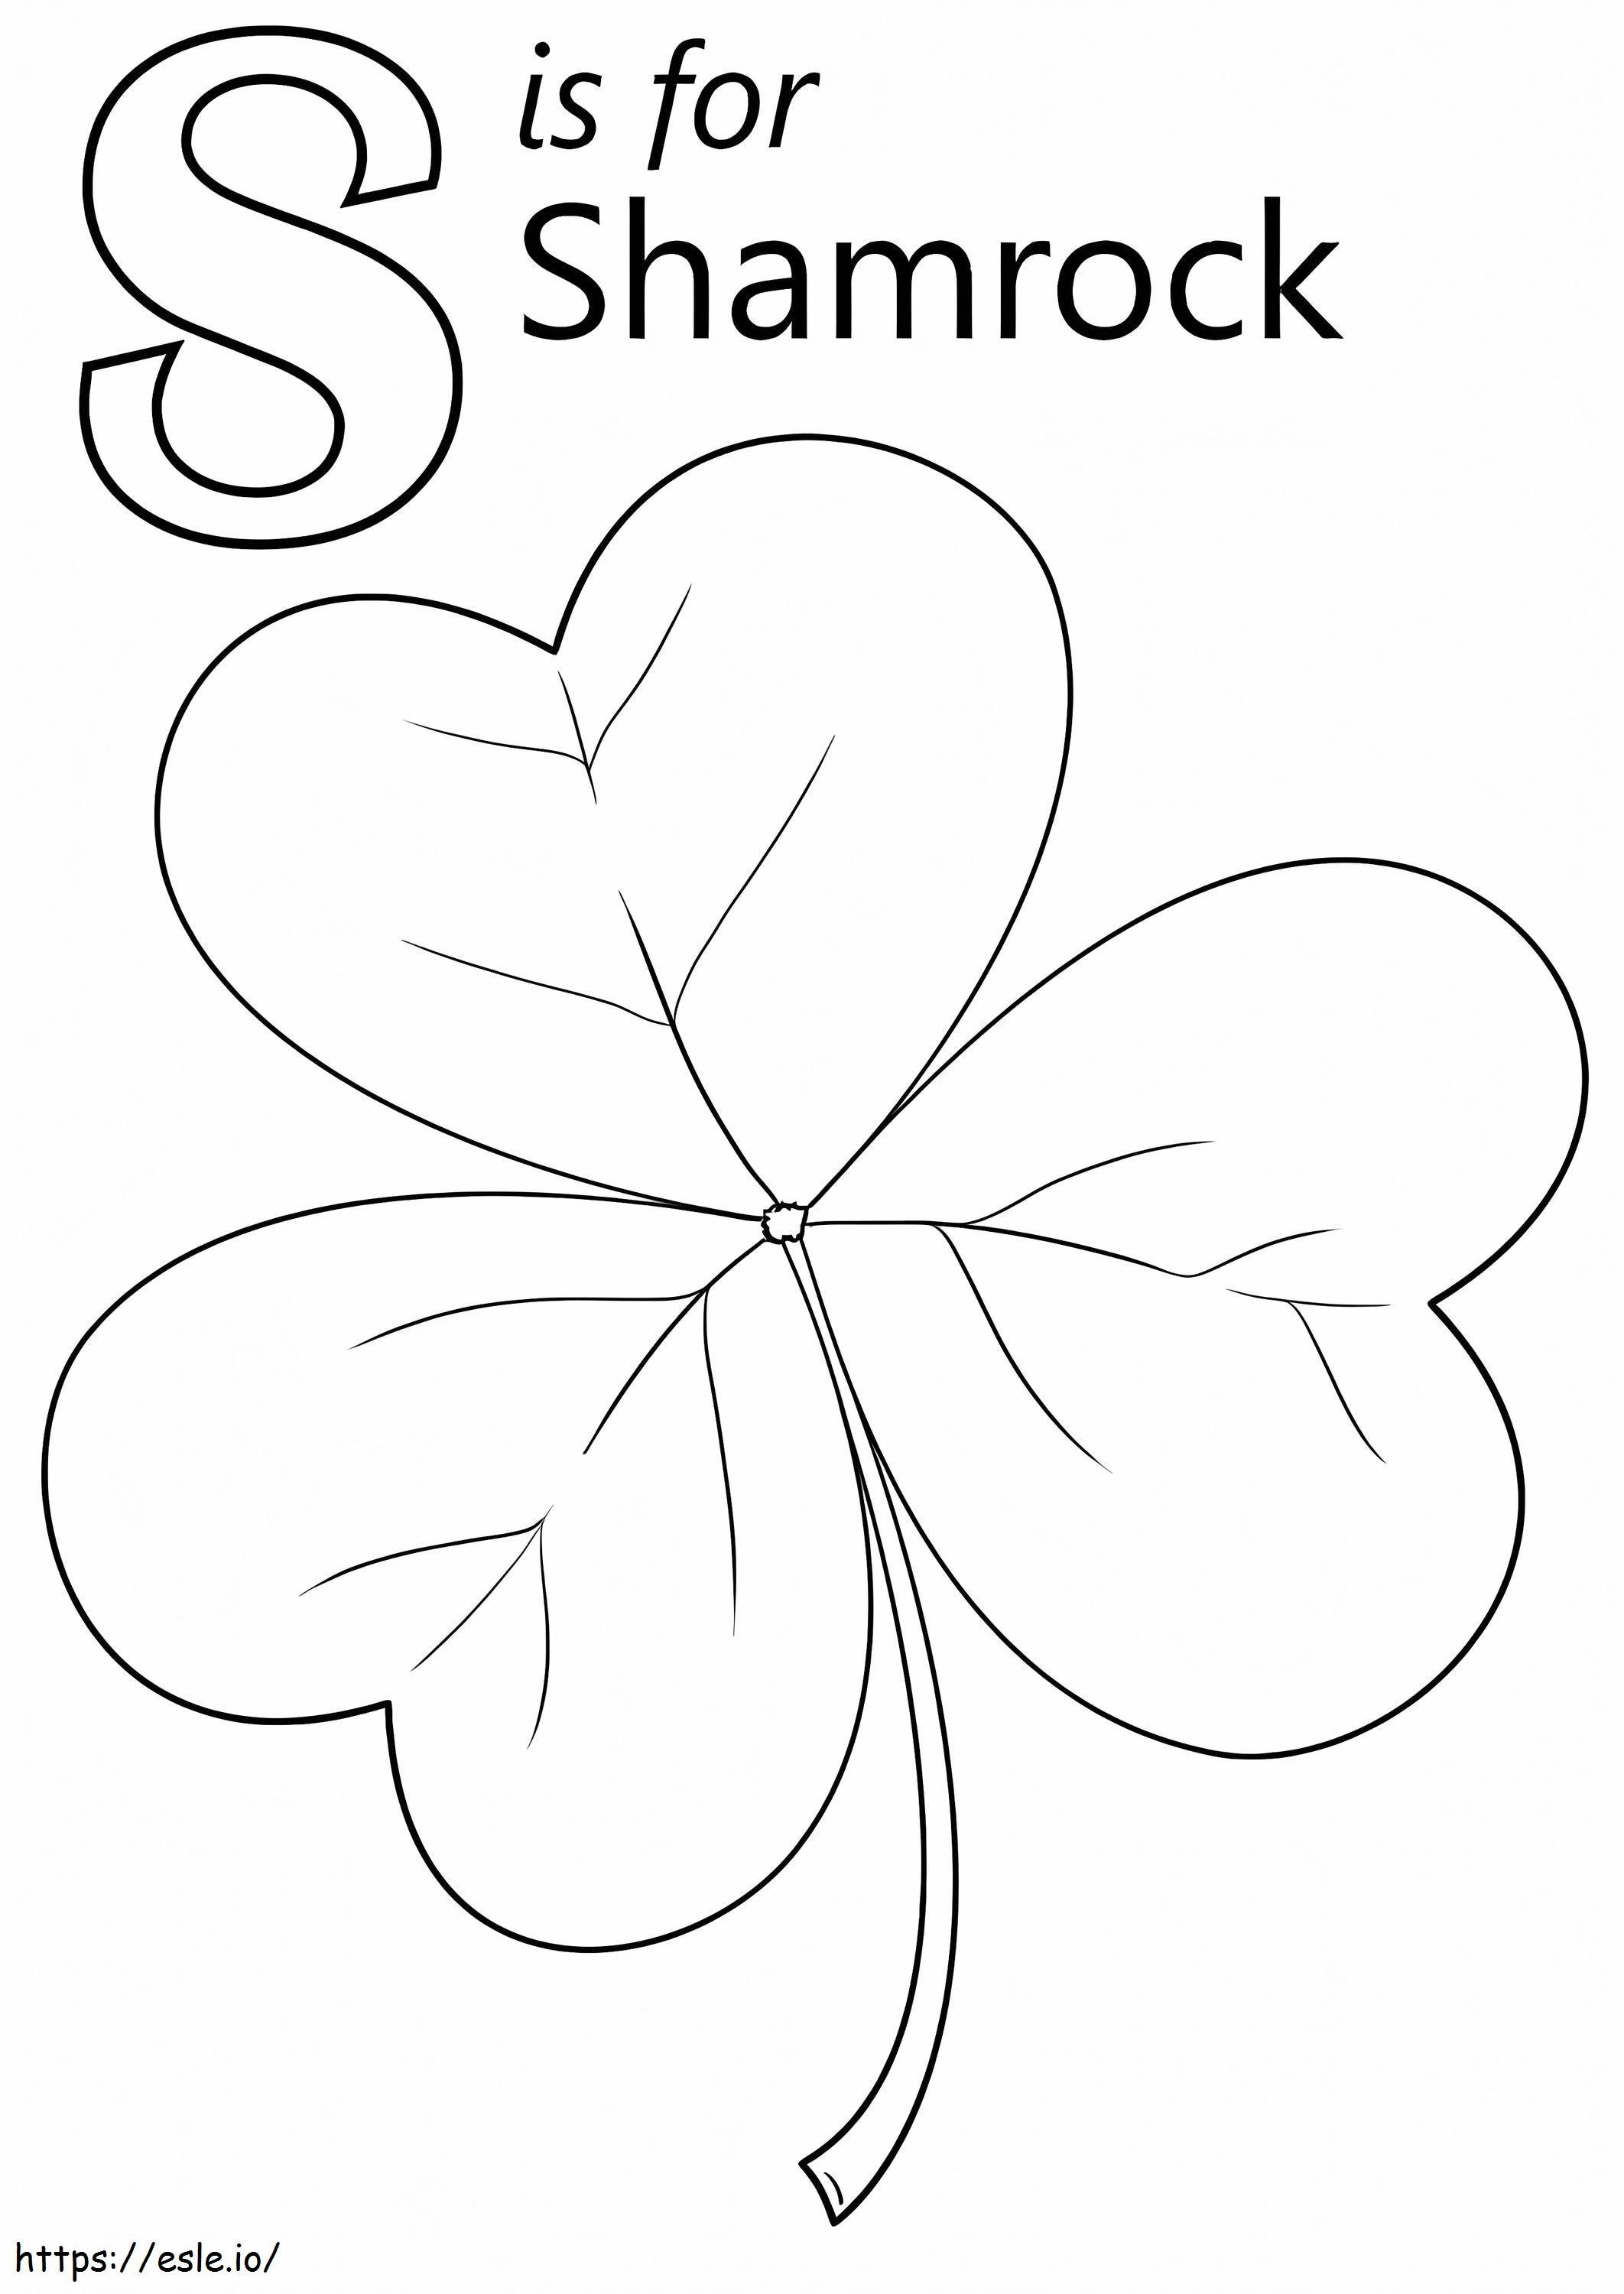 Shamrock Letter S coloring page